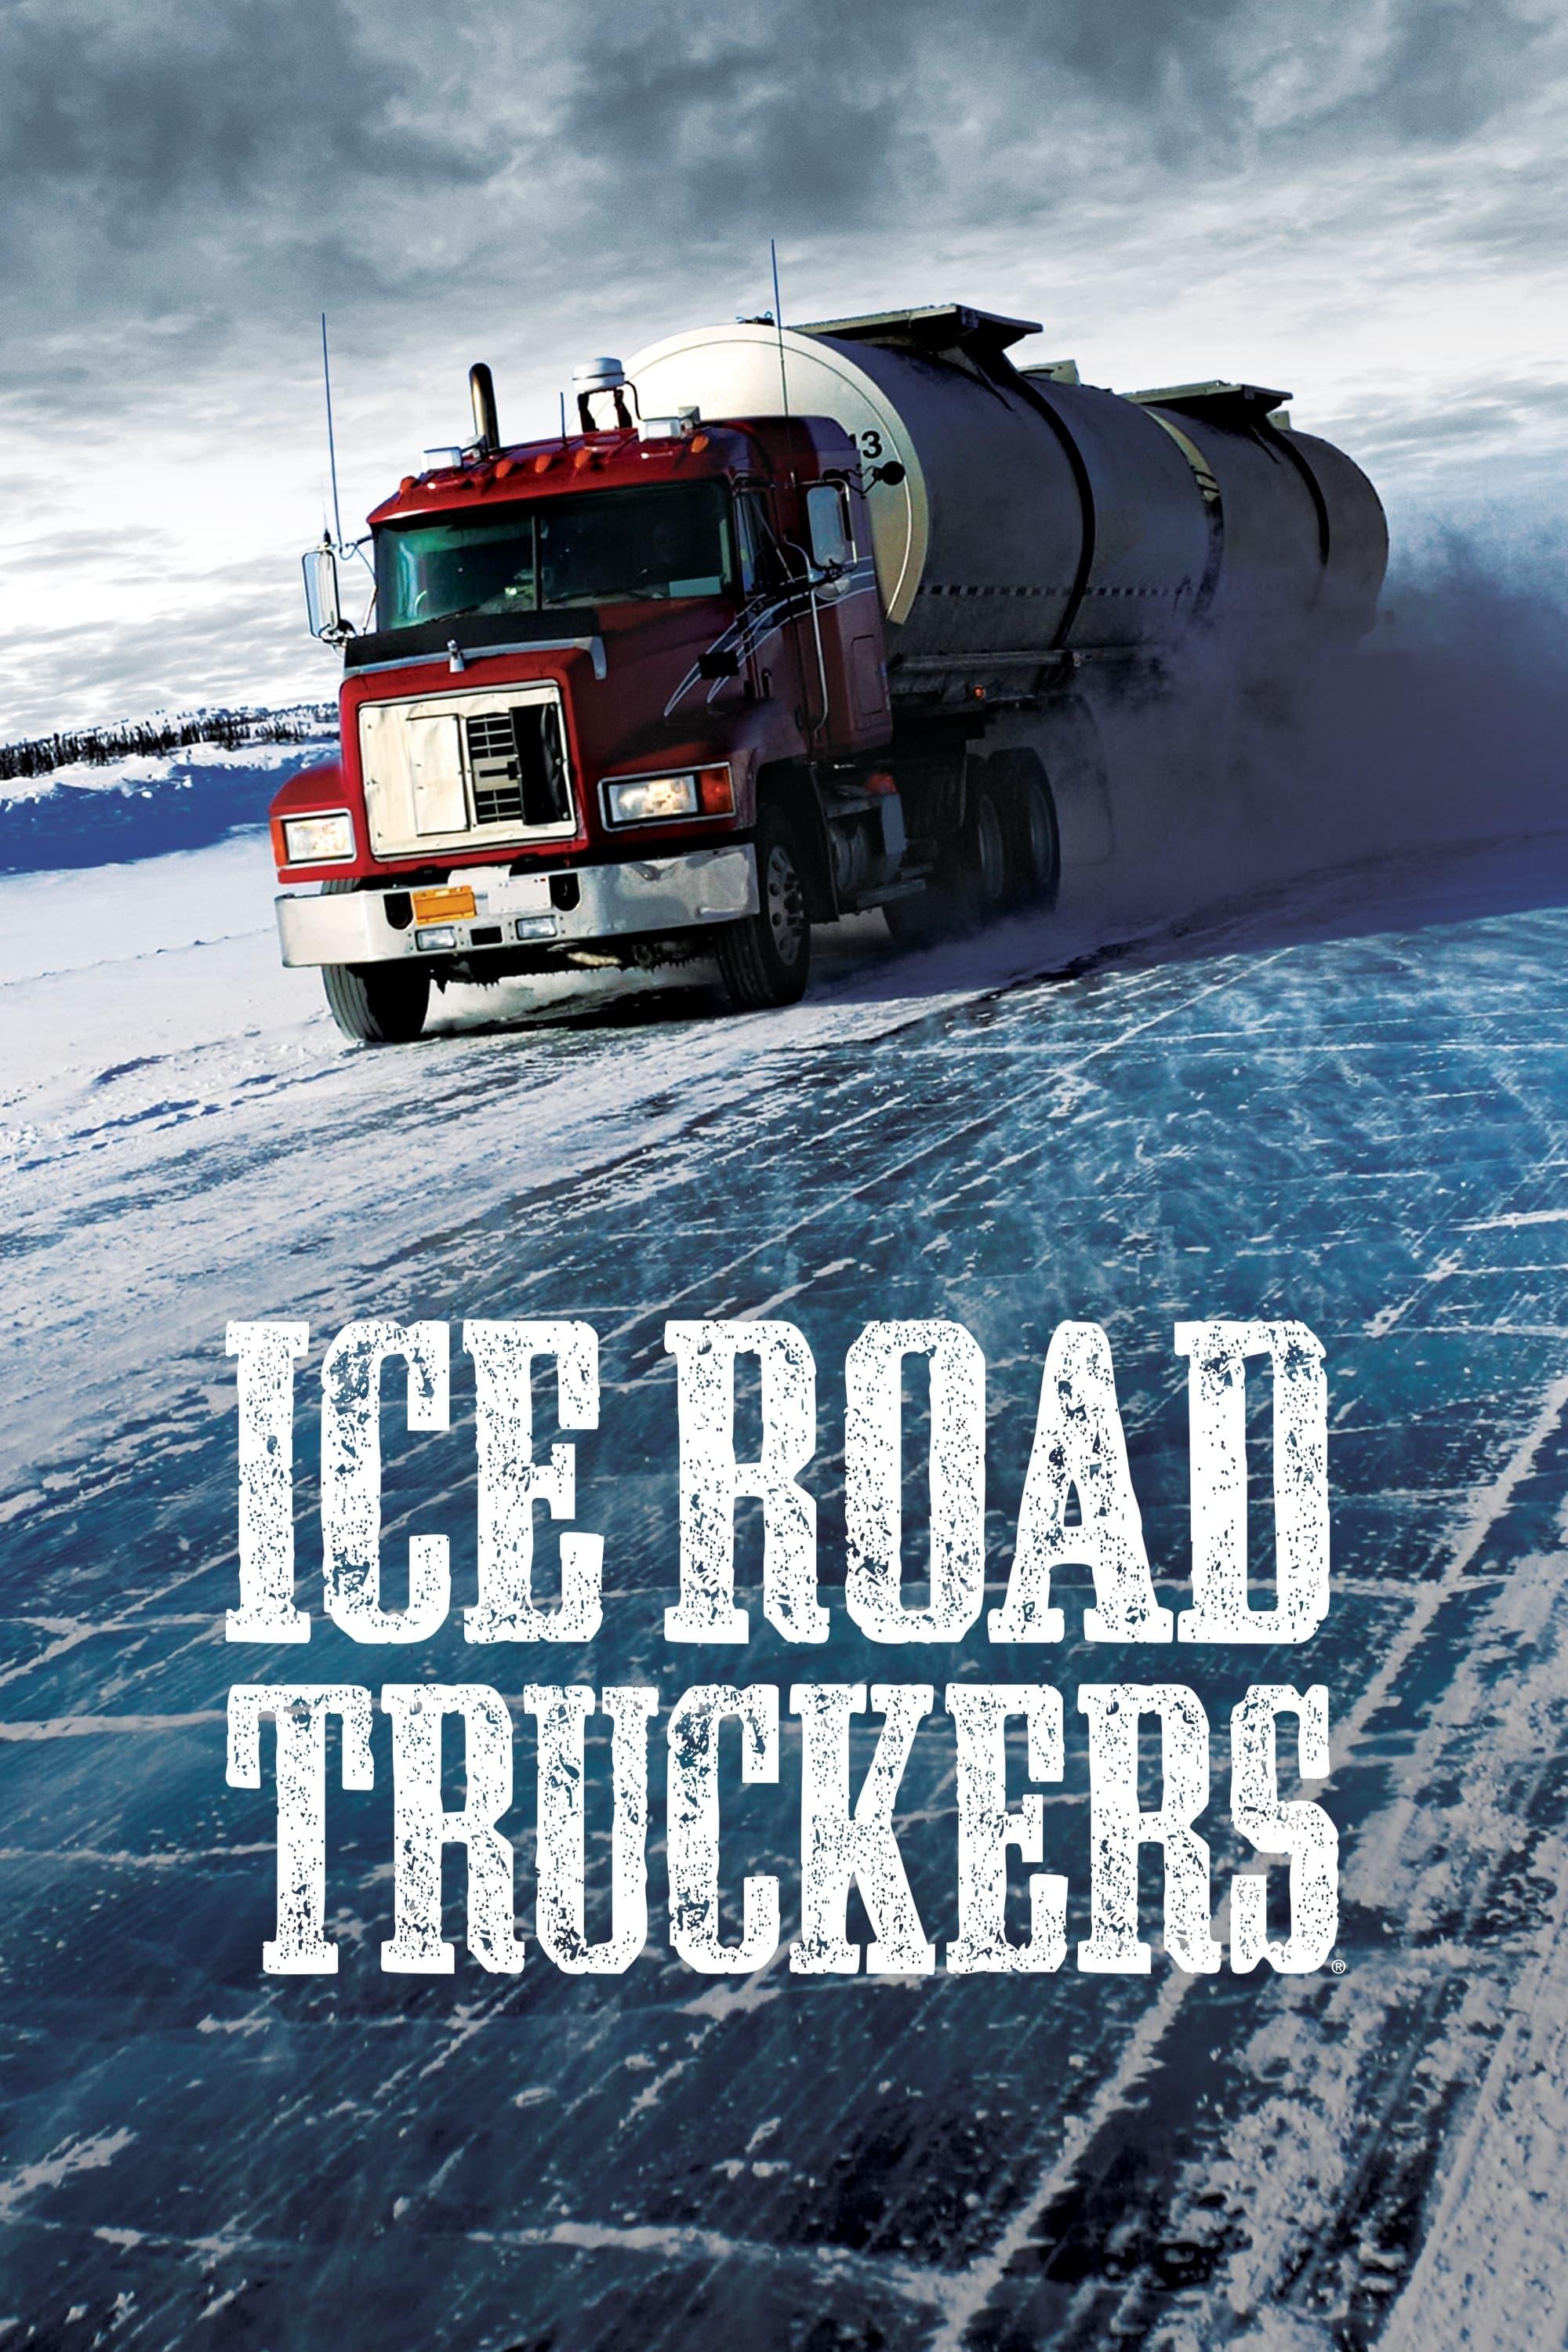 Ice Road Truckers poster